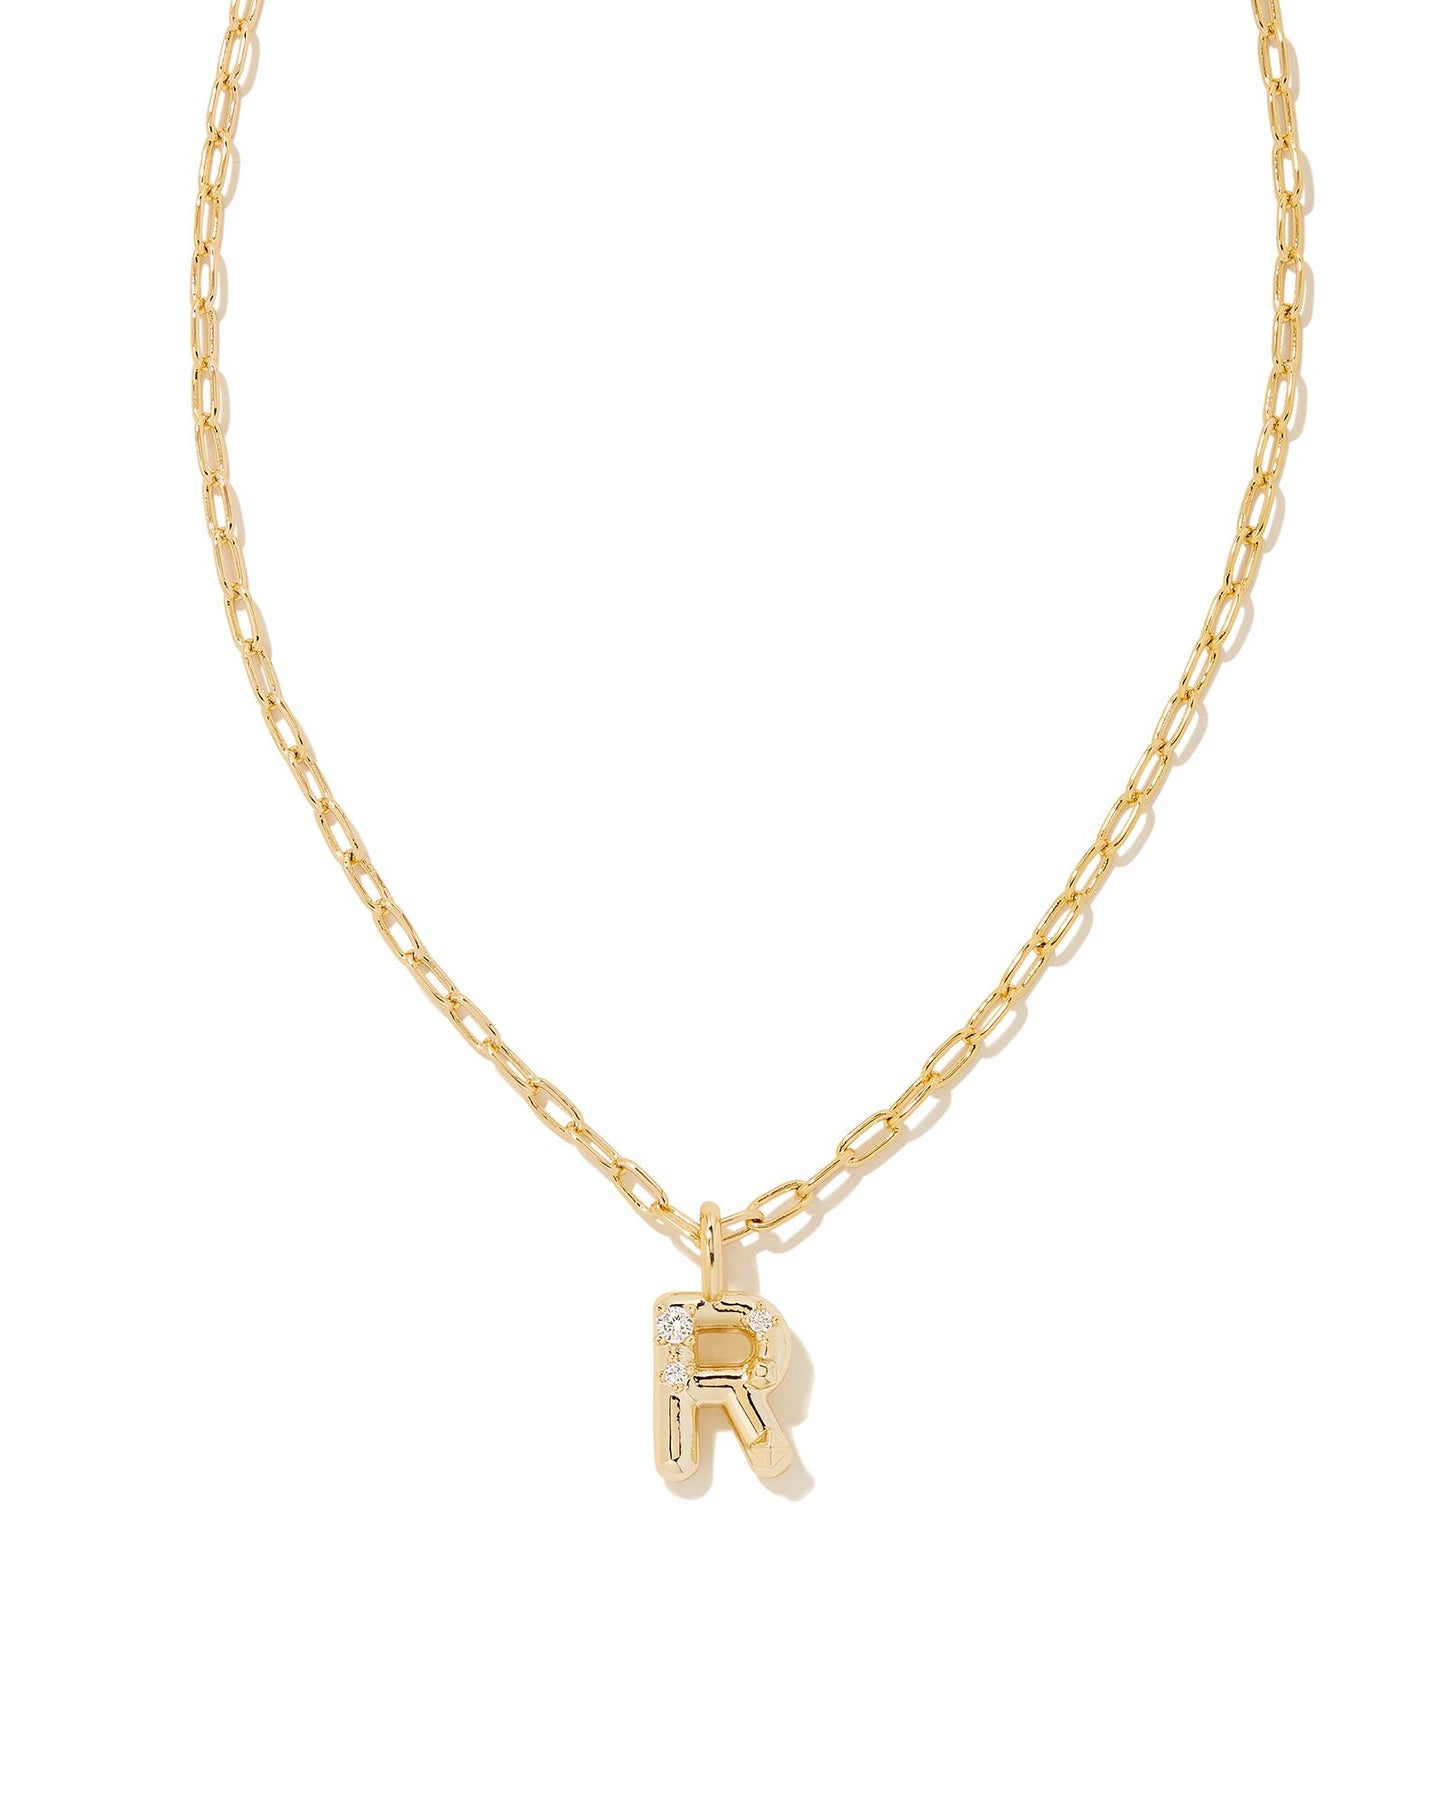 Personalize your everyday look with the Crystal Letter Short Pendant Necklace in White Crystal. Whether you’re rocking your initial or a loved one’s, this sentimental layer is one you’ll keep coming back to again and again.  Dimensions- 16' CHAIN WITH 3' EXTENDER, 0.62'L X 0.35"W PENDANT Metal- 14K Gold plated over brass Closure- Lobster Clasp Material-   White CZ Letter R